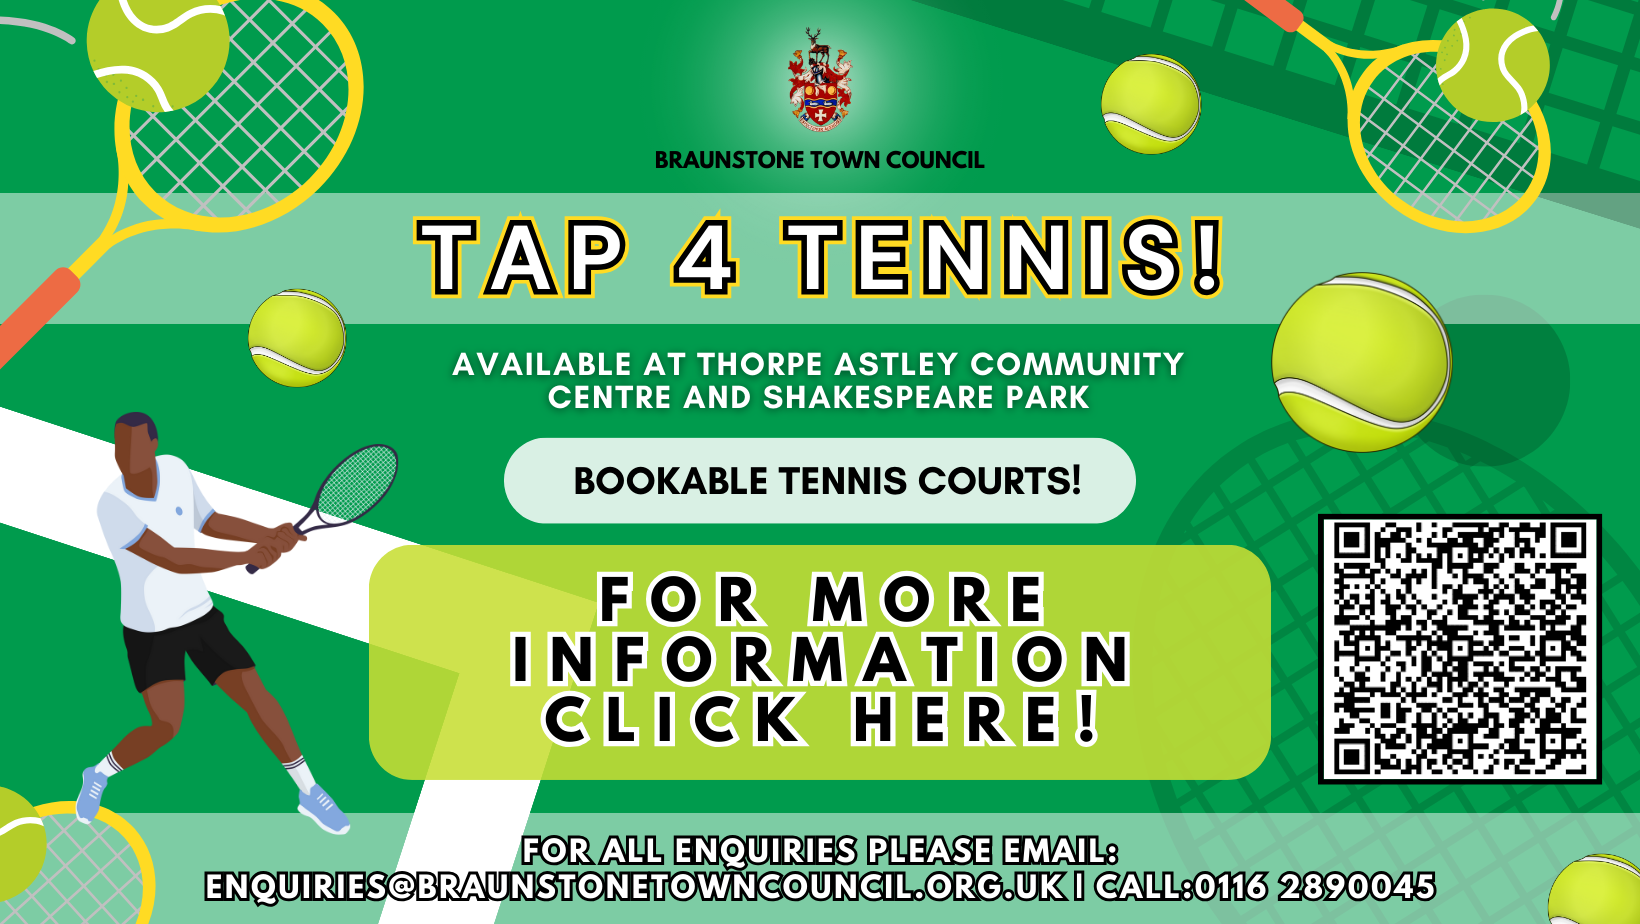 Tap 4 Tennis - Book a Court Today!